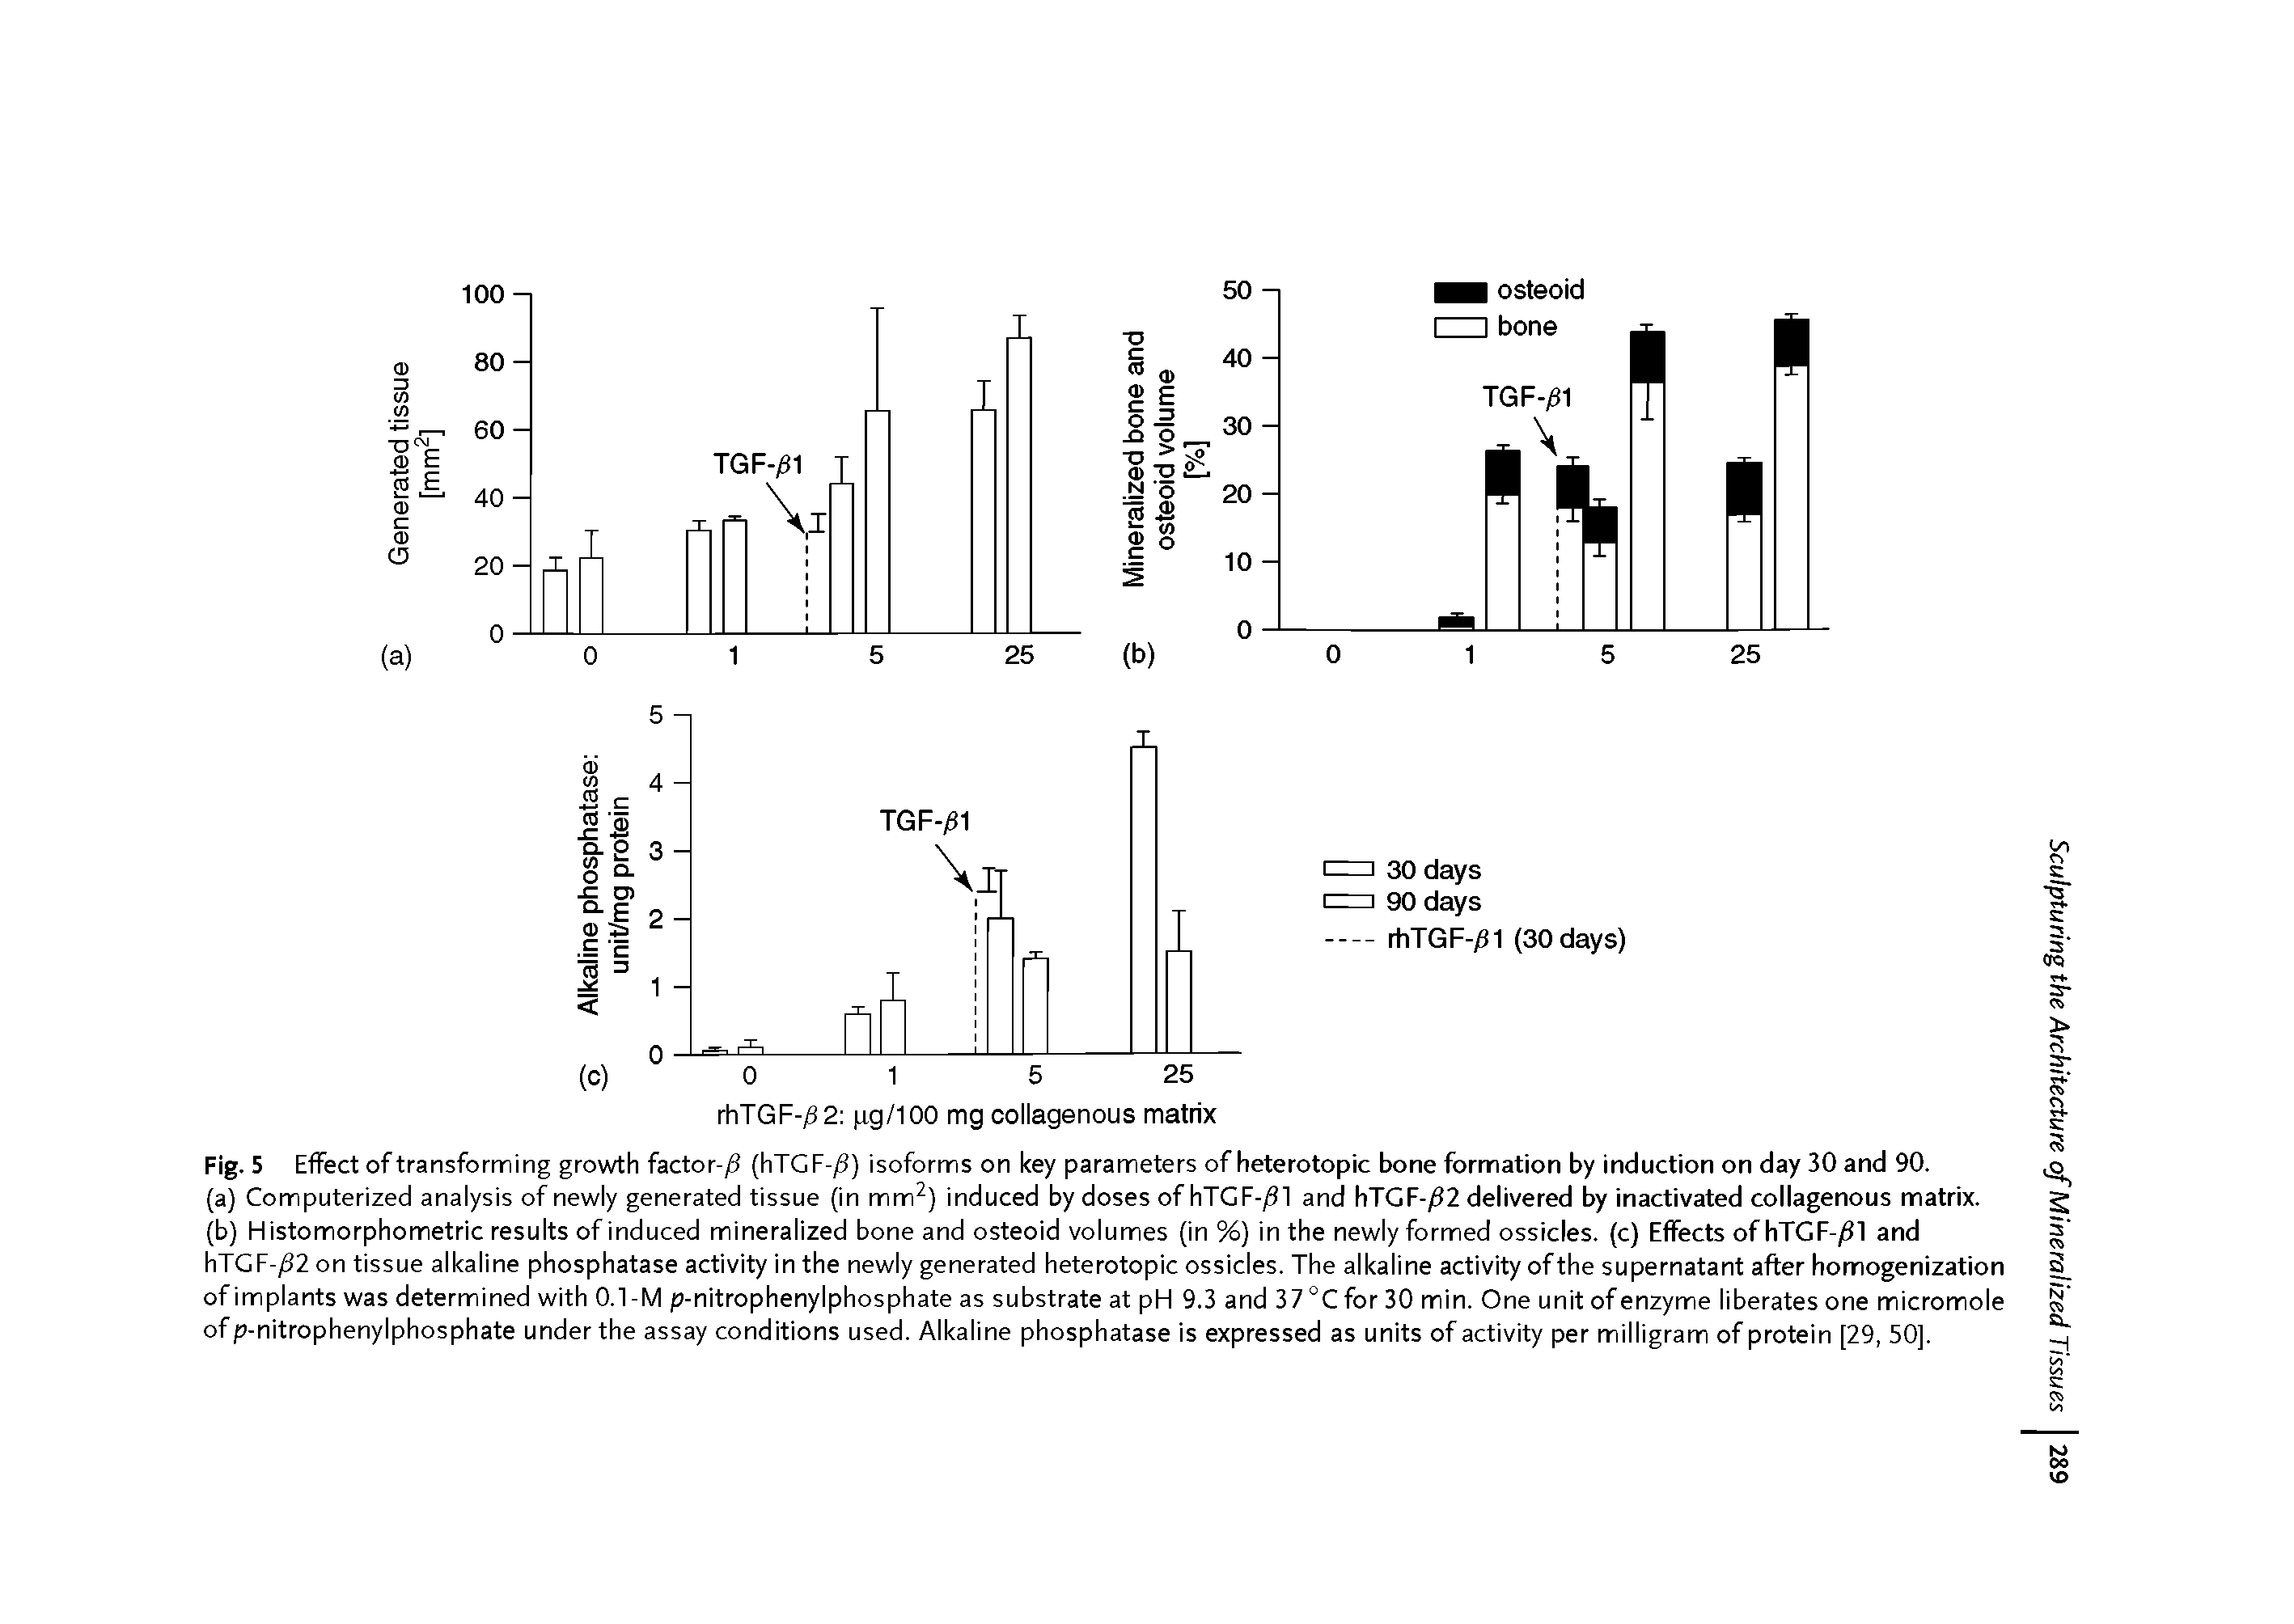 Fig. 5 Effect of transforming growth factor-/ (hTGF-/9) isoforms on key parameters of heterotopic bone formation by induction on day 30 and 90.